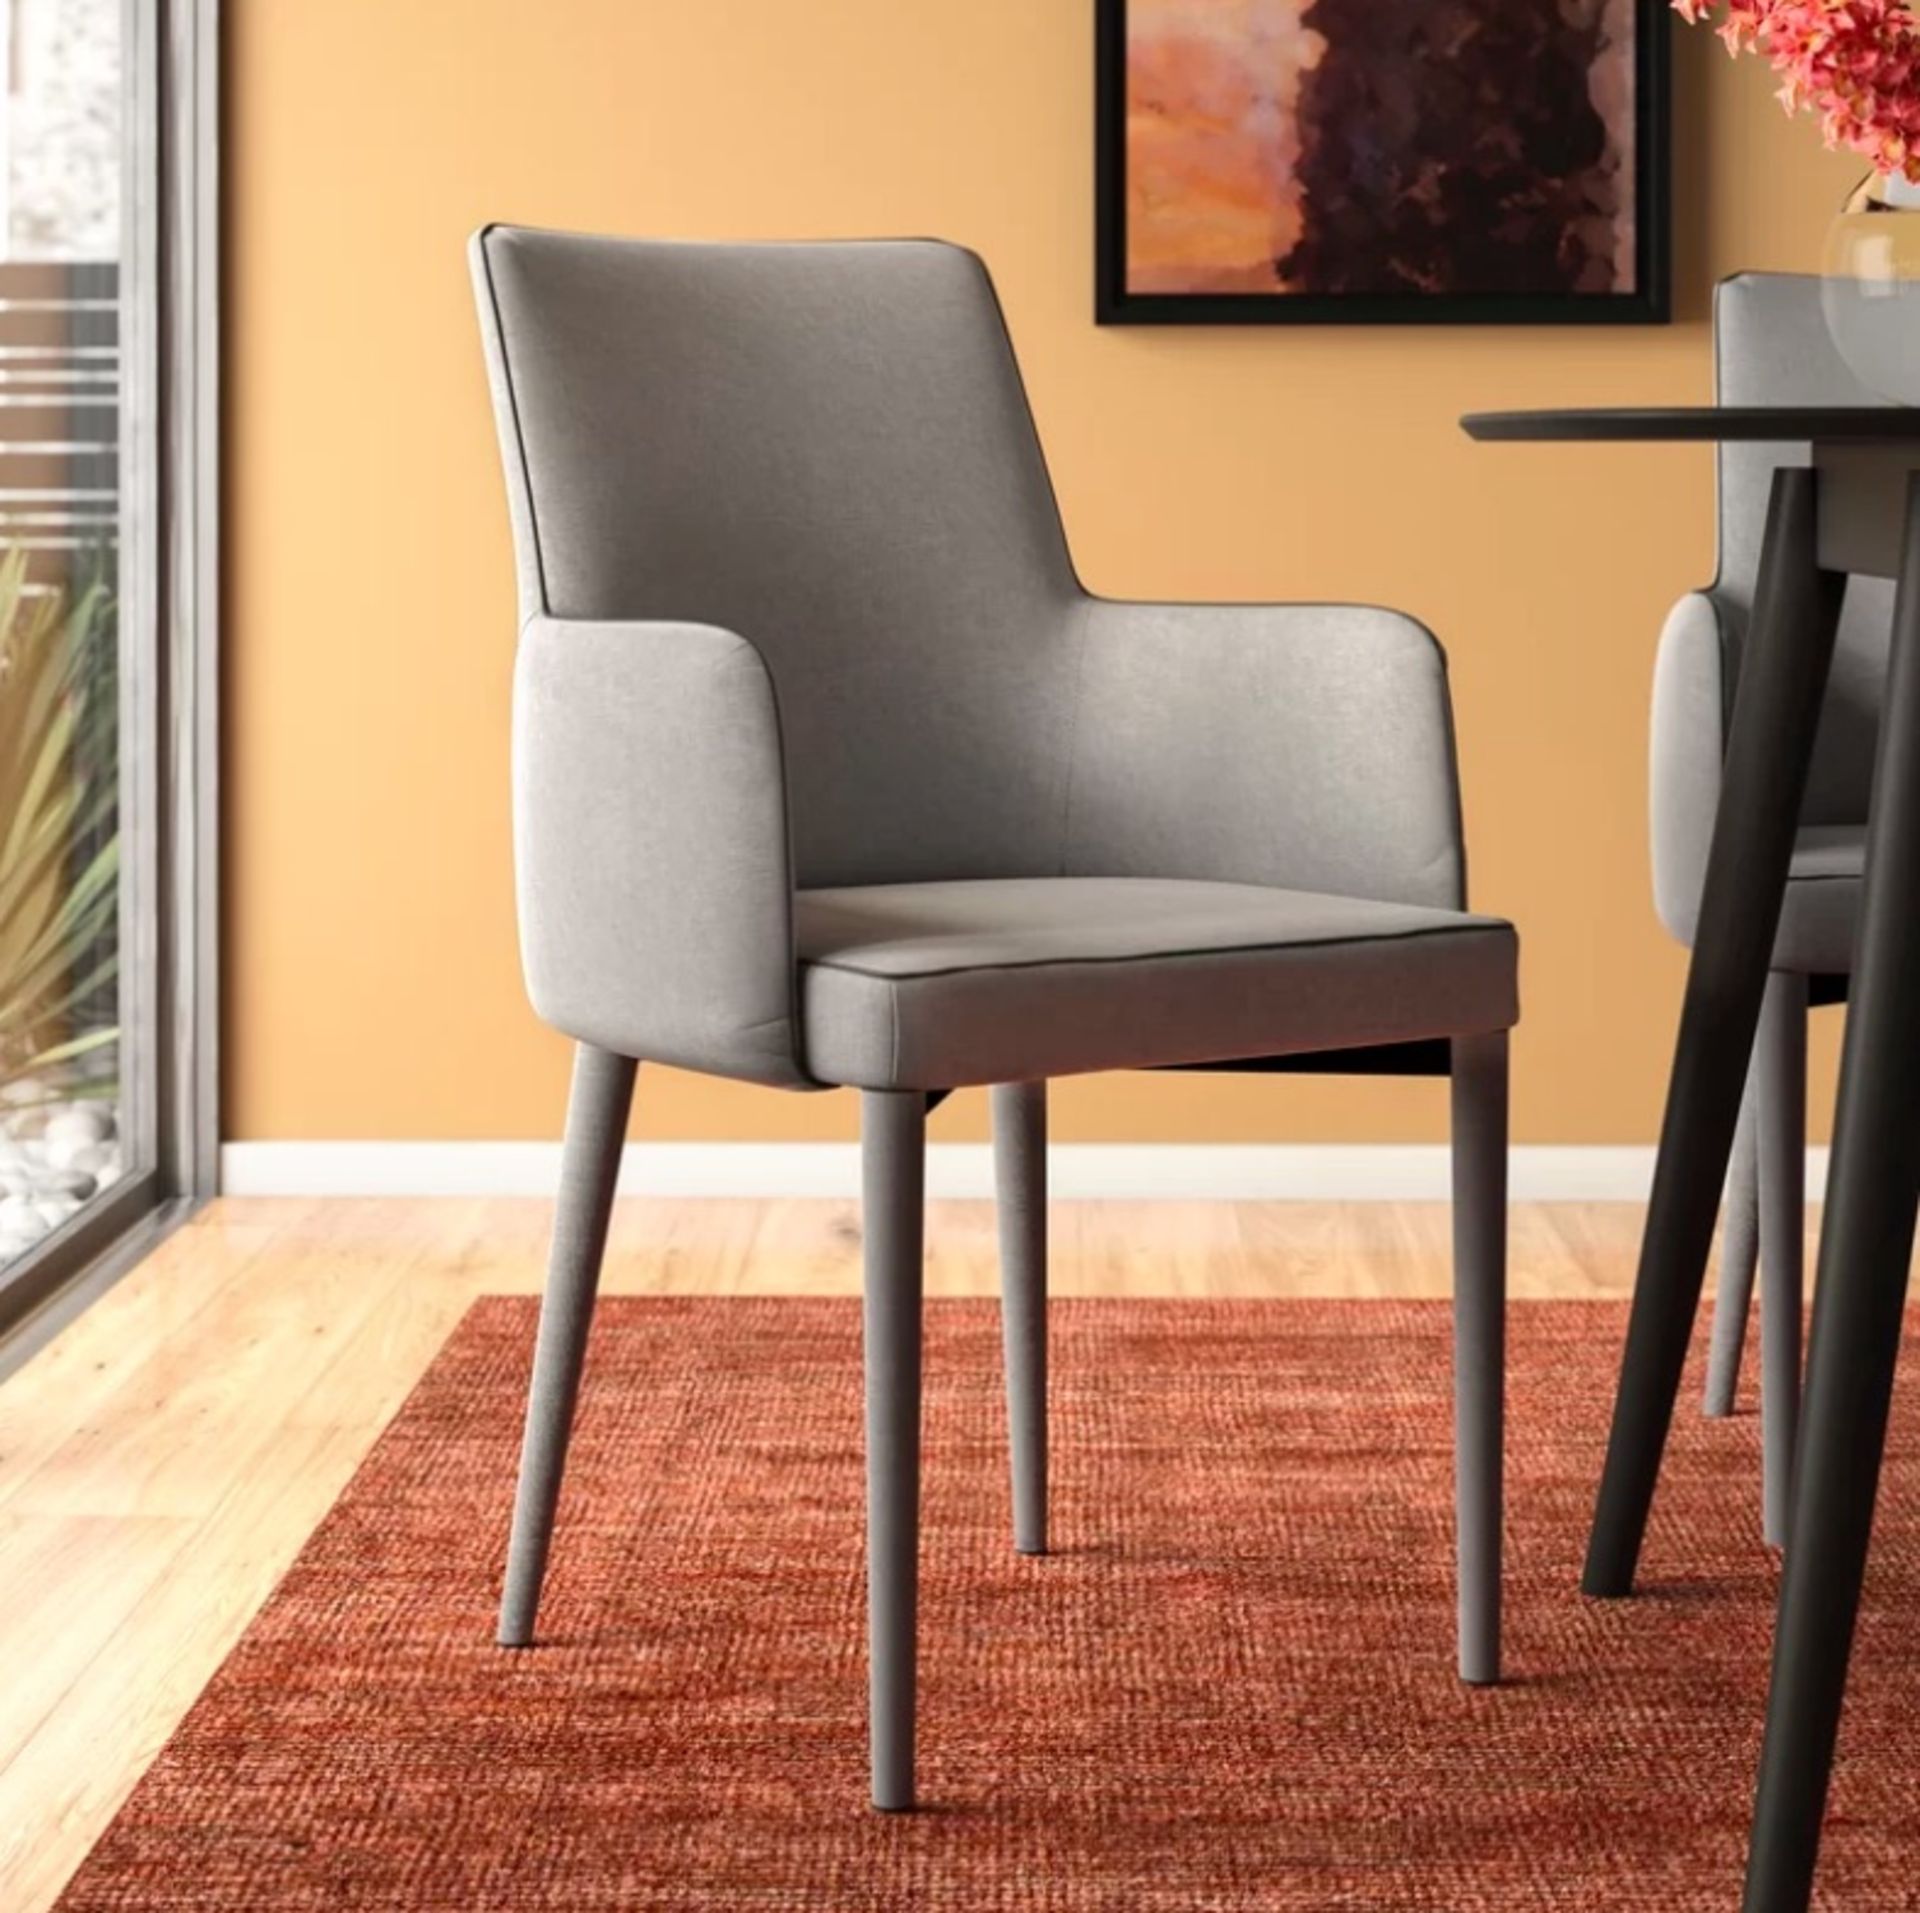 Carver ChairSit back and relax in these ultra comfy carver chairs. Upholstered from head to toe in a